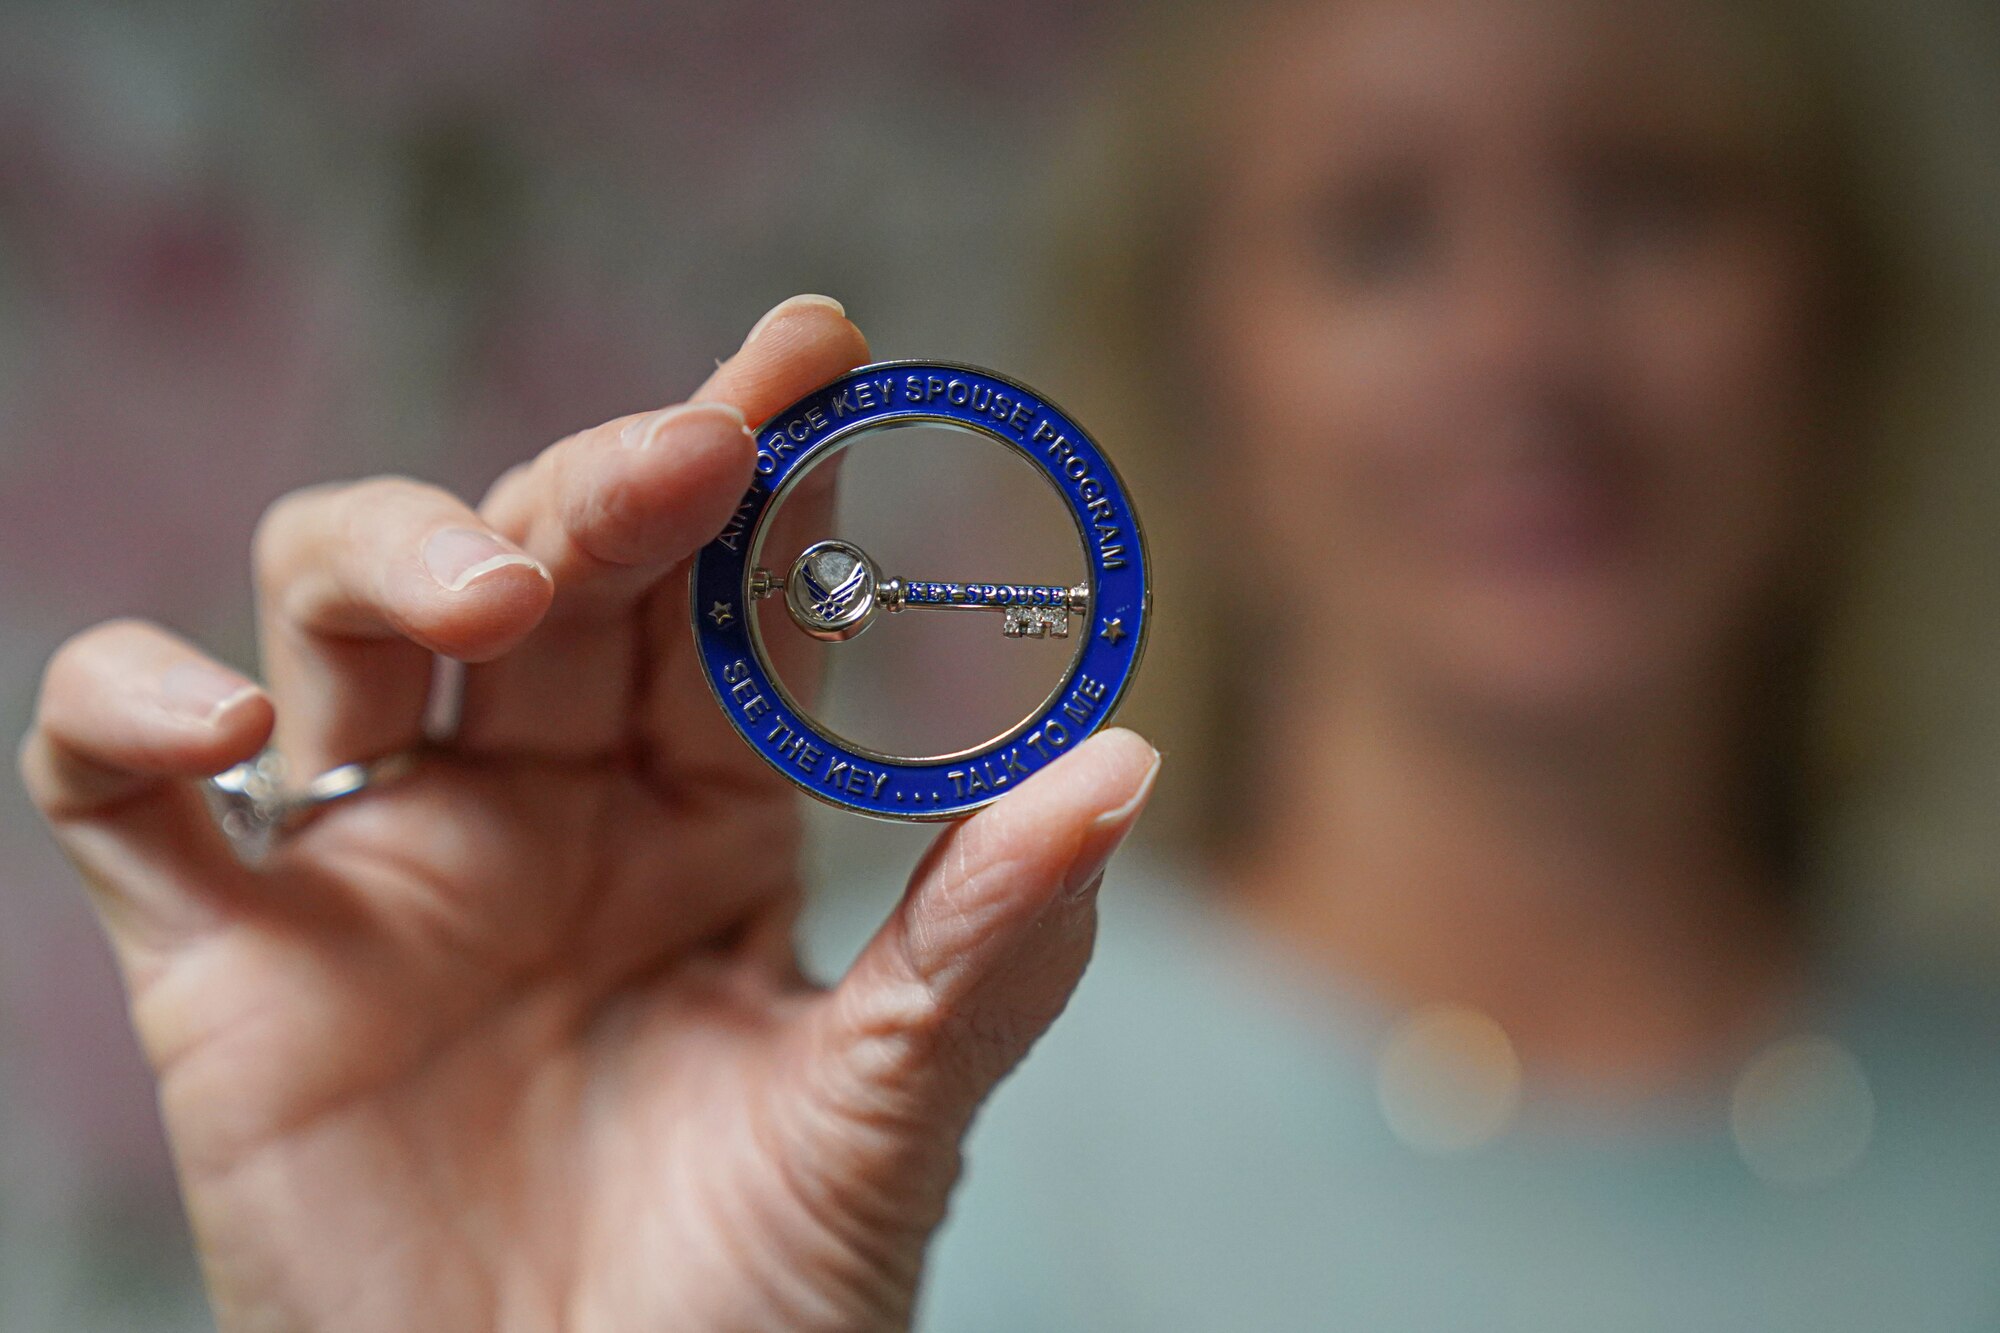 Rhonda Ferrell, 81st Force Support Squadron key spouse coordinator, displays a Key Spouse coin in the Sablich Center on Keesler Air Force Base, Mississippi, Oct. 17, 2022.